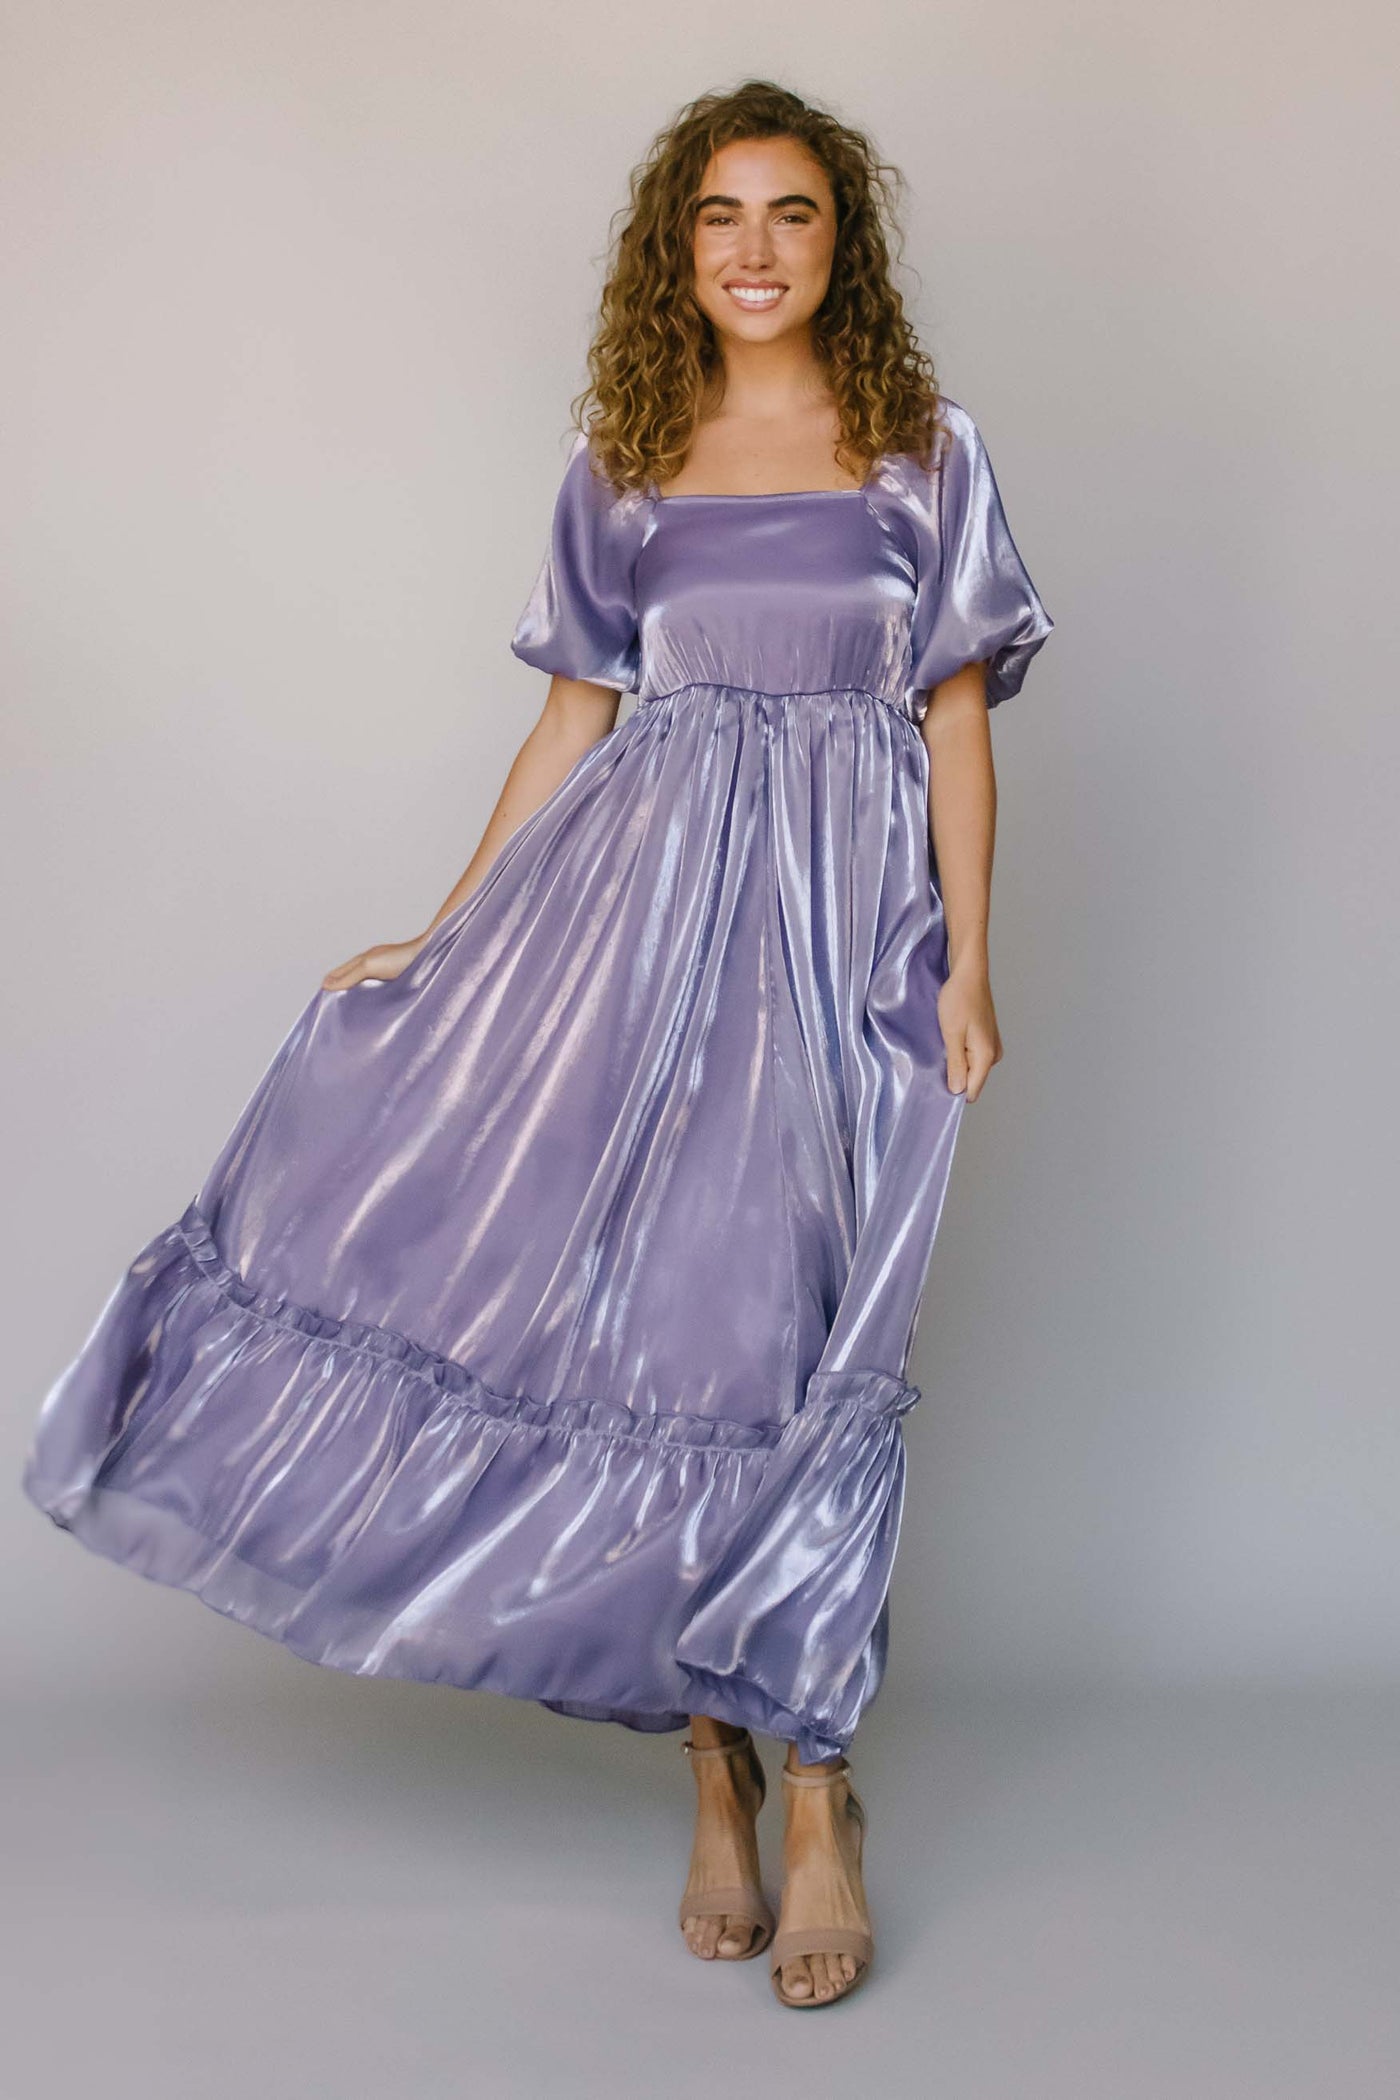 A modest dress with an iridescent, purple fabric, puff sleeves, a square neck, and a single tier.